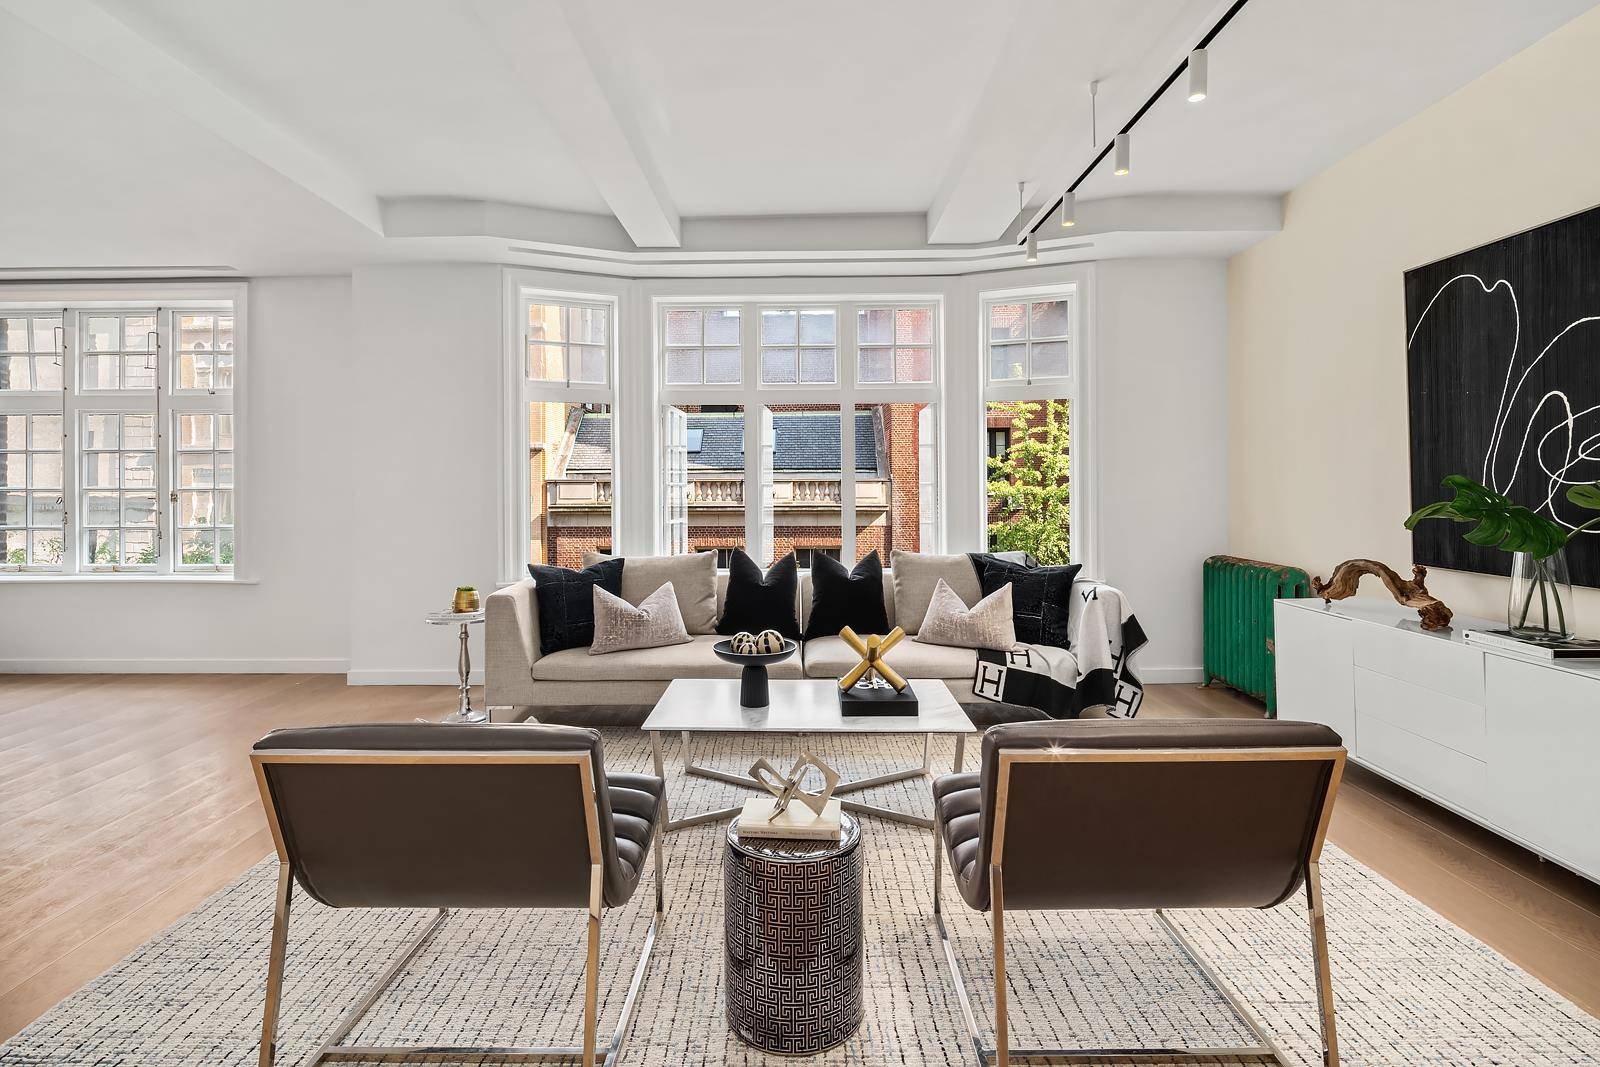 BRAND NEW, FULLY GUT RENOVATED CONDO APT OFF MADISON AVEModern convenience meets old world charm in this newly renovated pre war condo apartment on one of the Upper East Side's ...